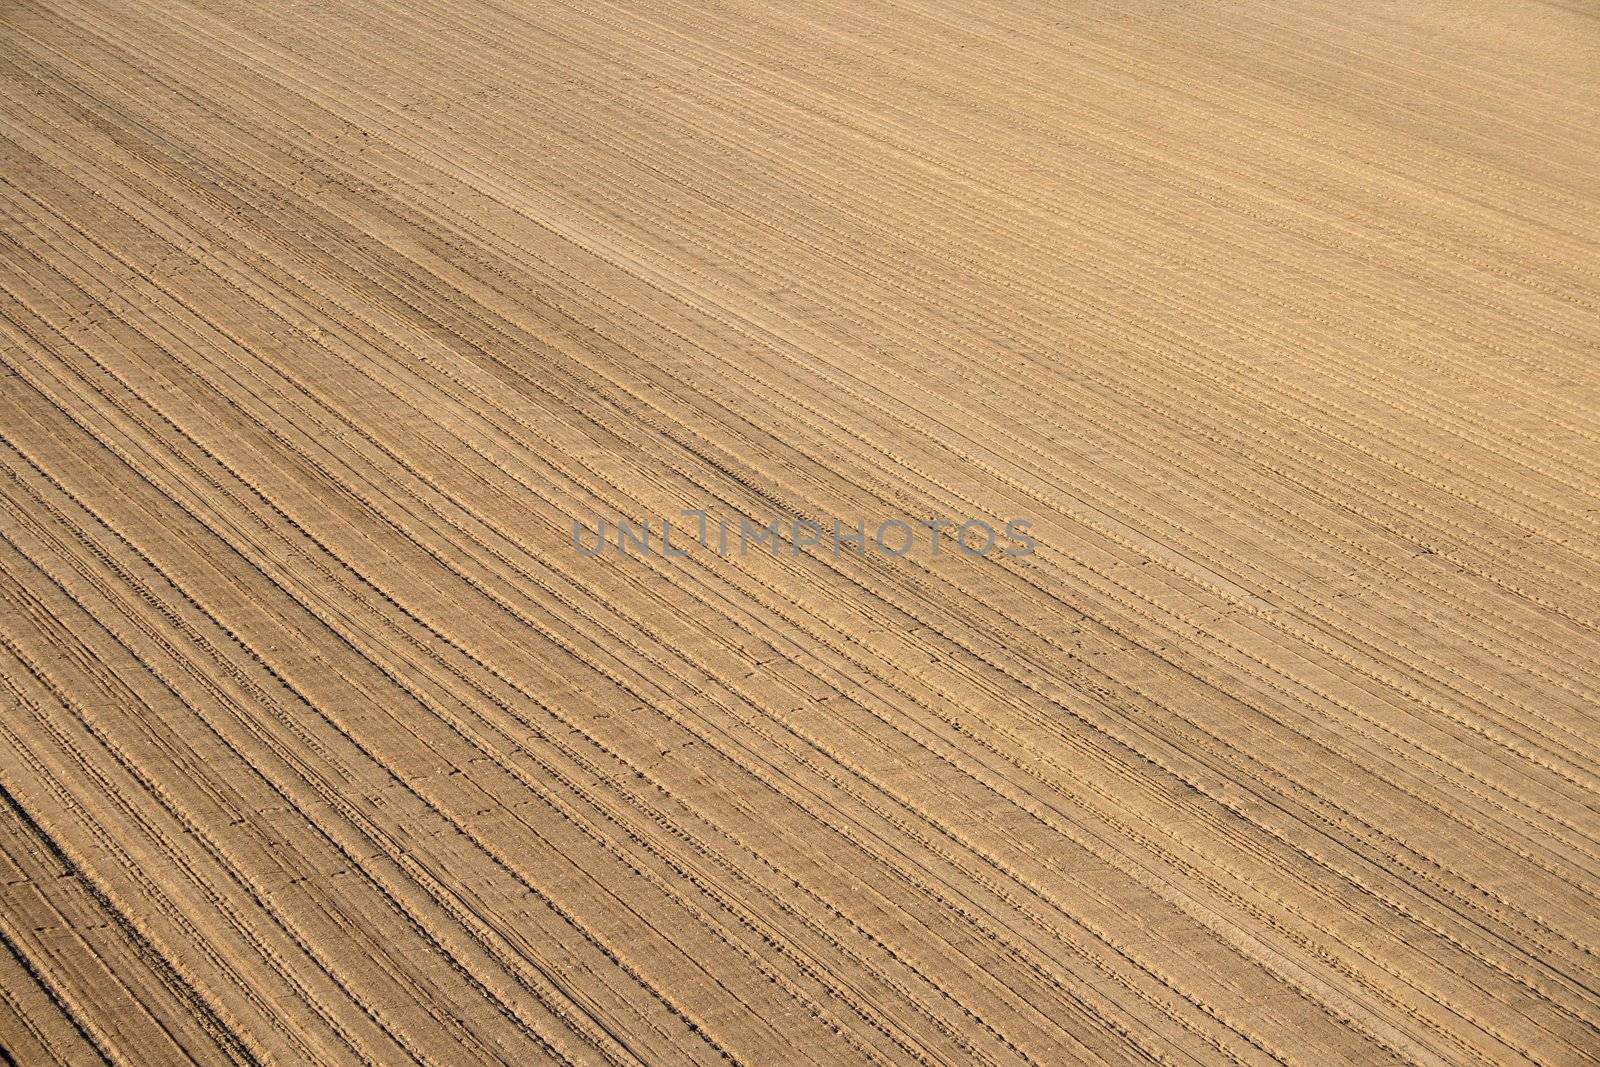 Ploughed land ready for cultivation by anikasalsera